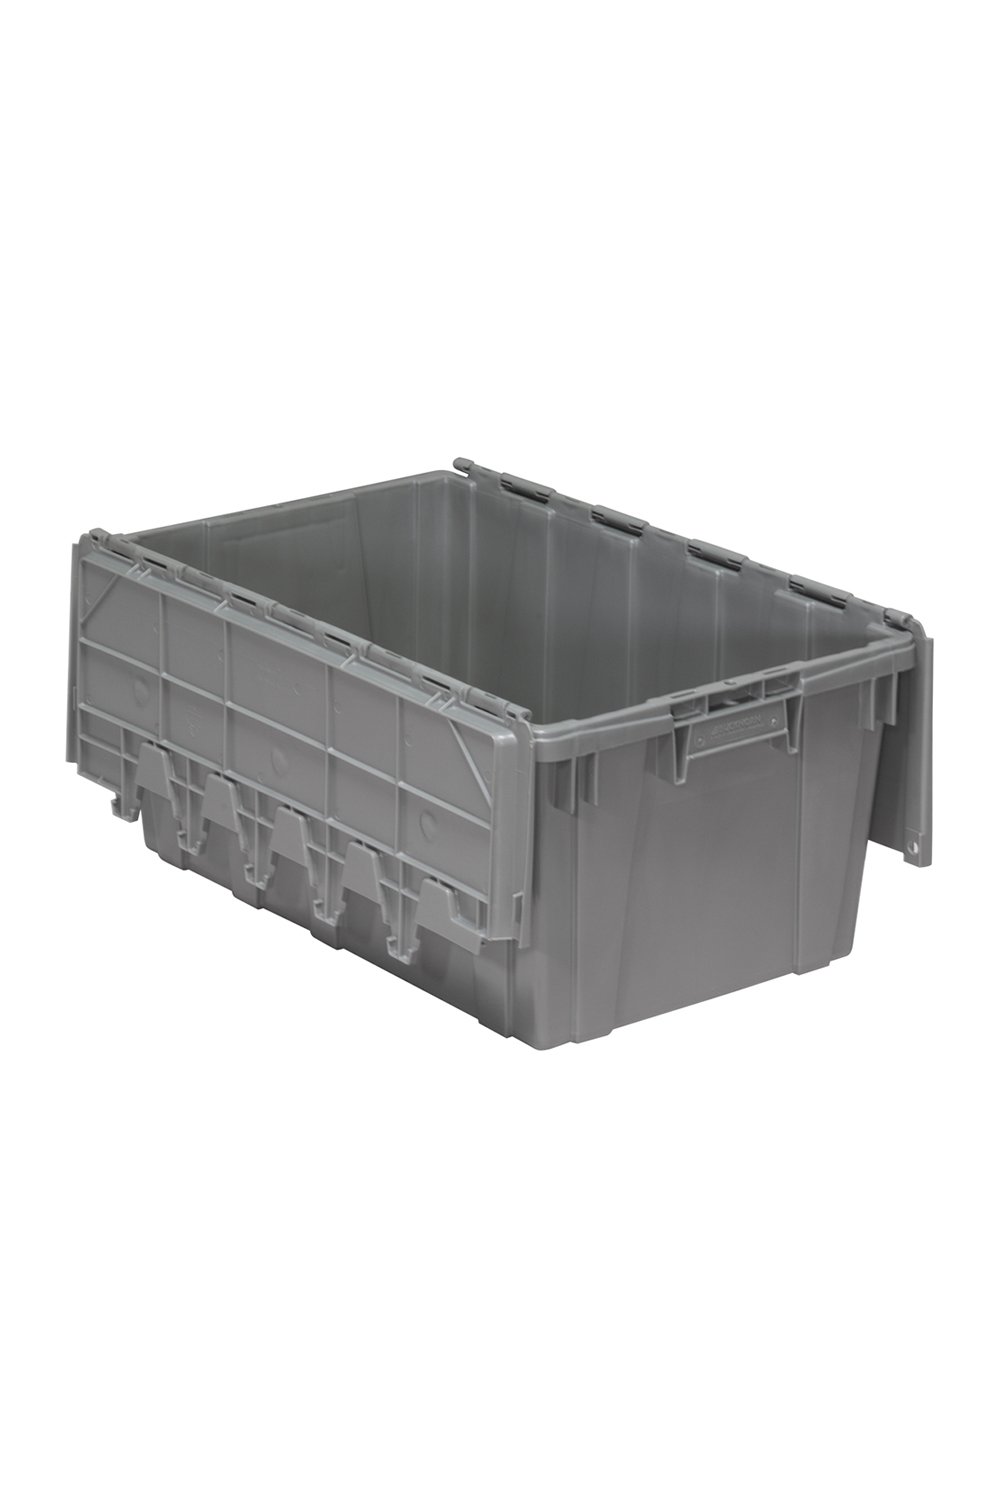 Attached Top Container Bins & Containers Acart 27"L x 17-3/4"W x 12-1/2"H Grey 